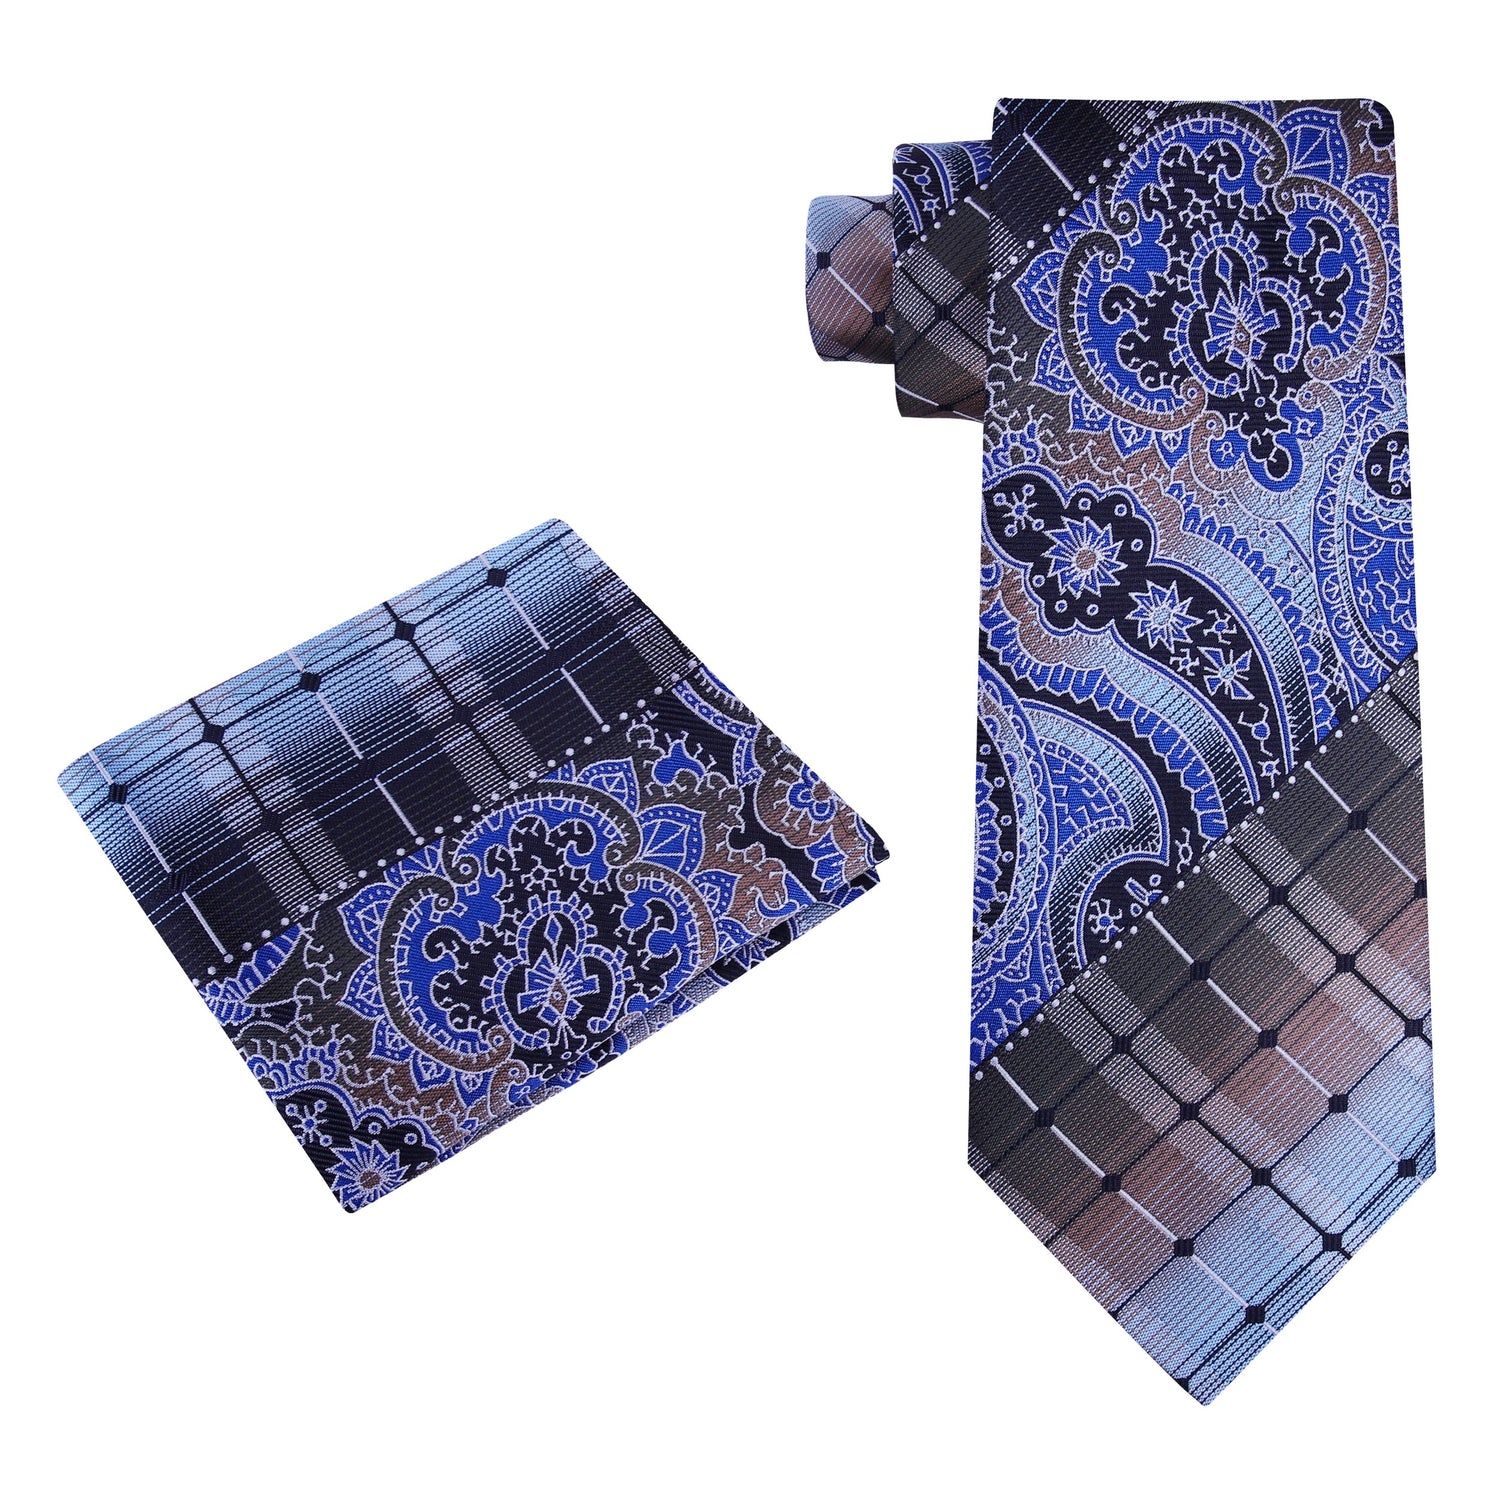 Alt View: Brown, Blue Paisley Silk Necktie and Pocket Square